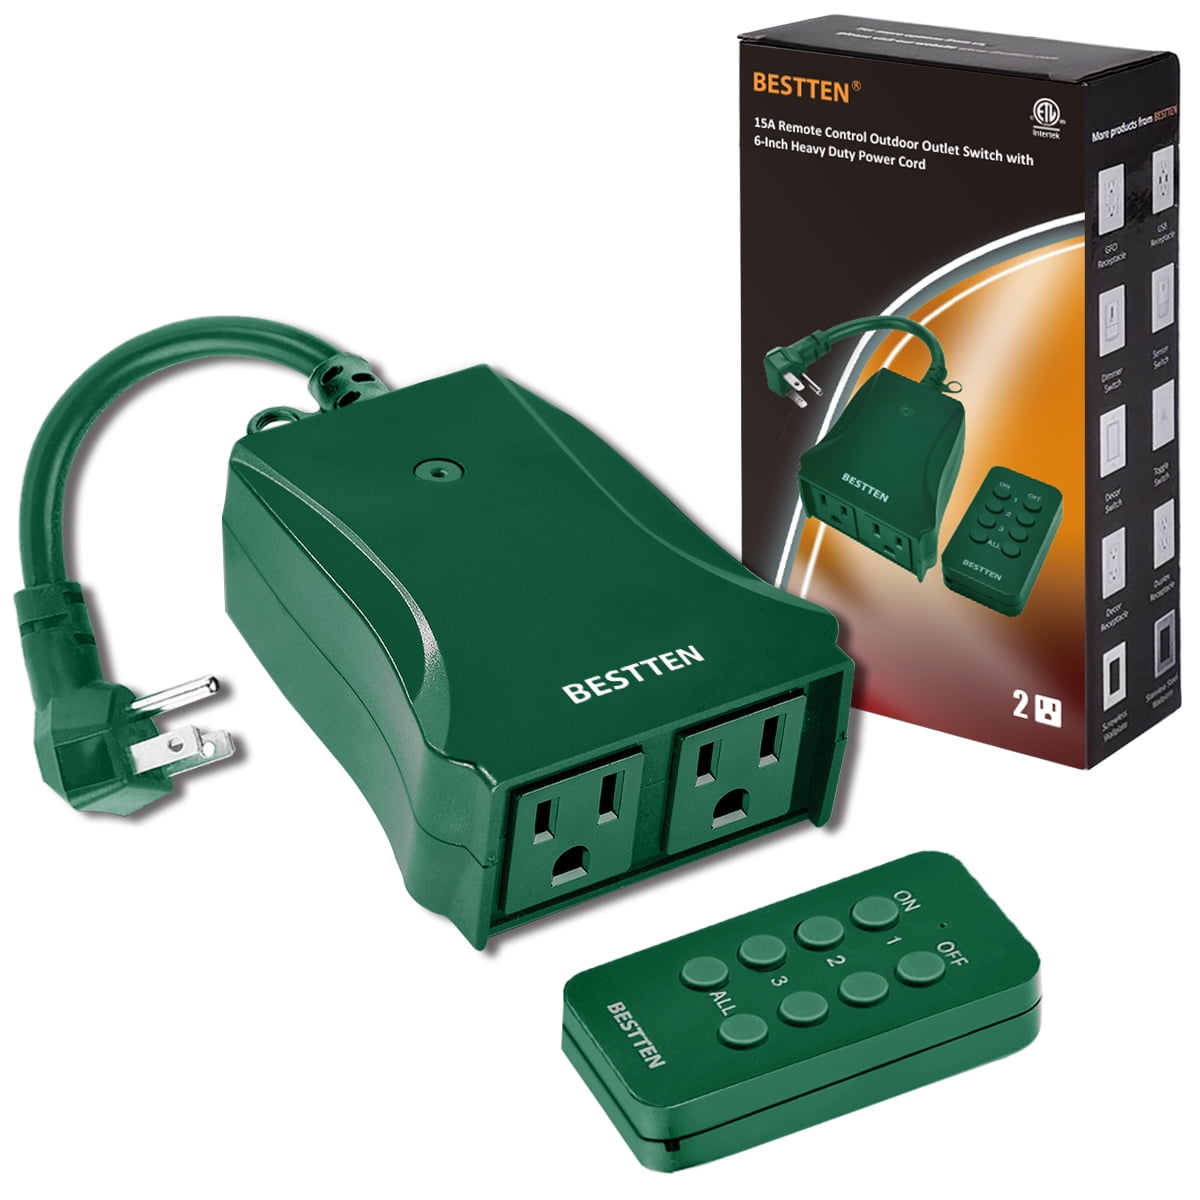 BESTTEN Remote Control Outlet Plug, Wireless Power Switch Combo